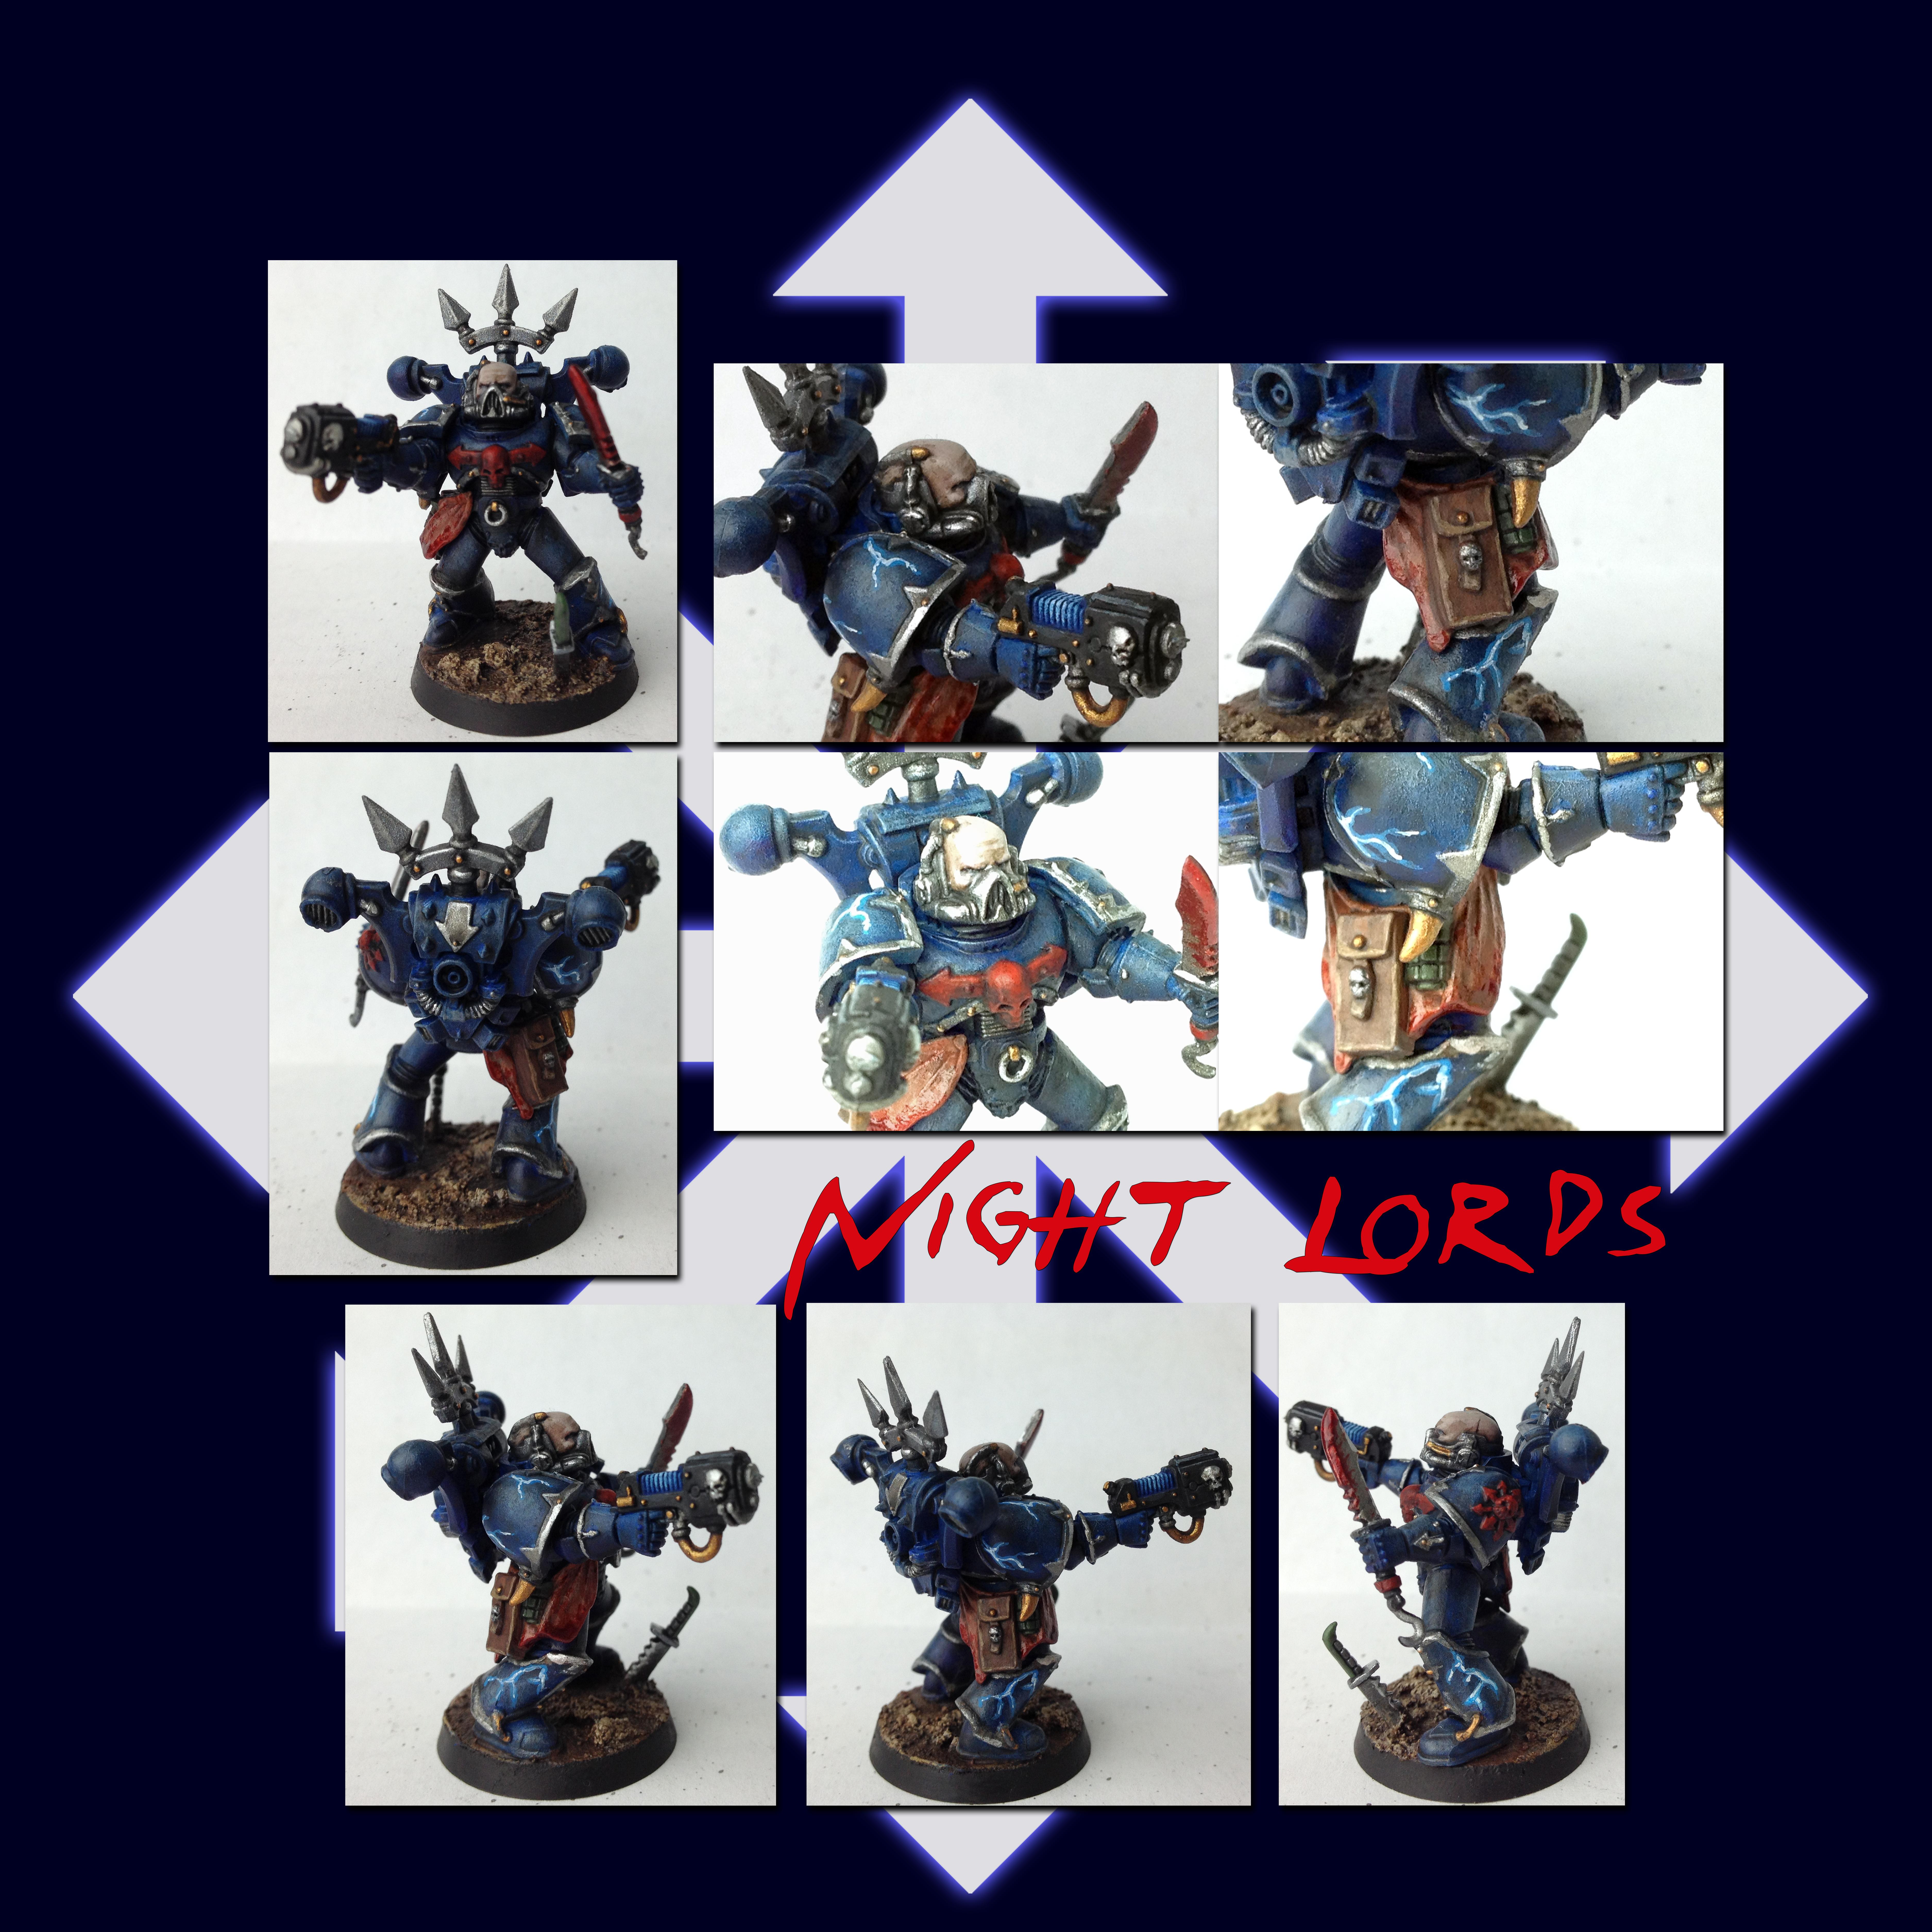 Chaos, Night Lords, Space Marines, Warhammer 40,000